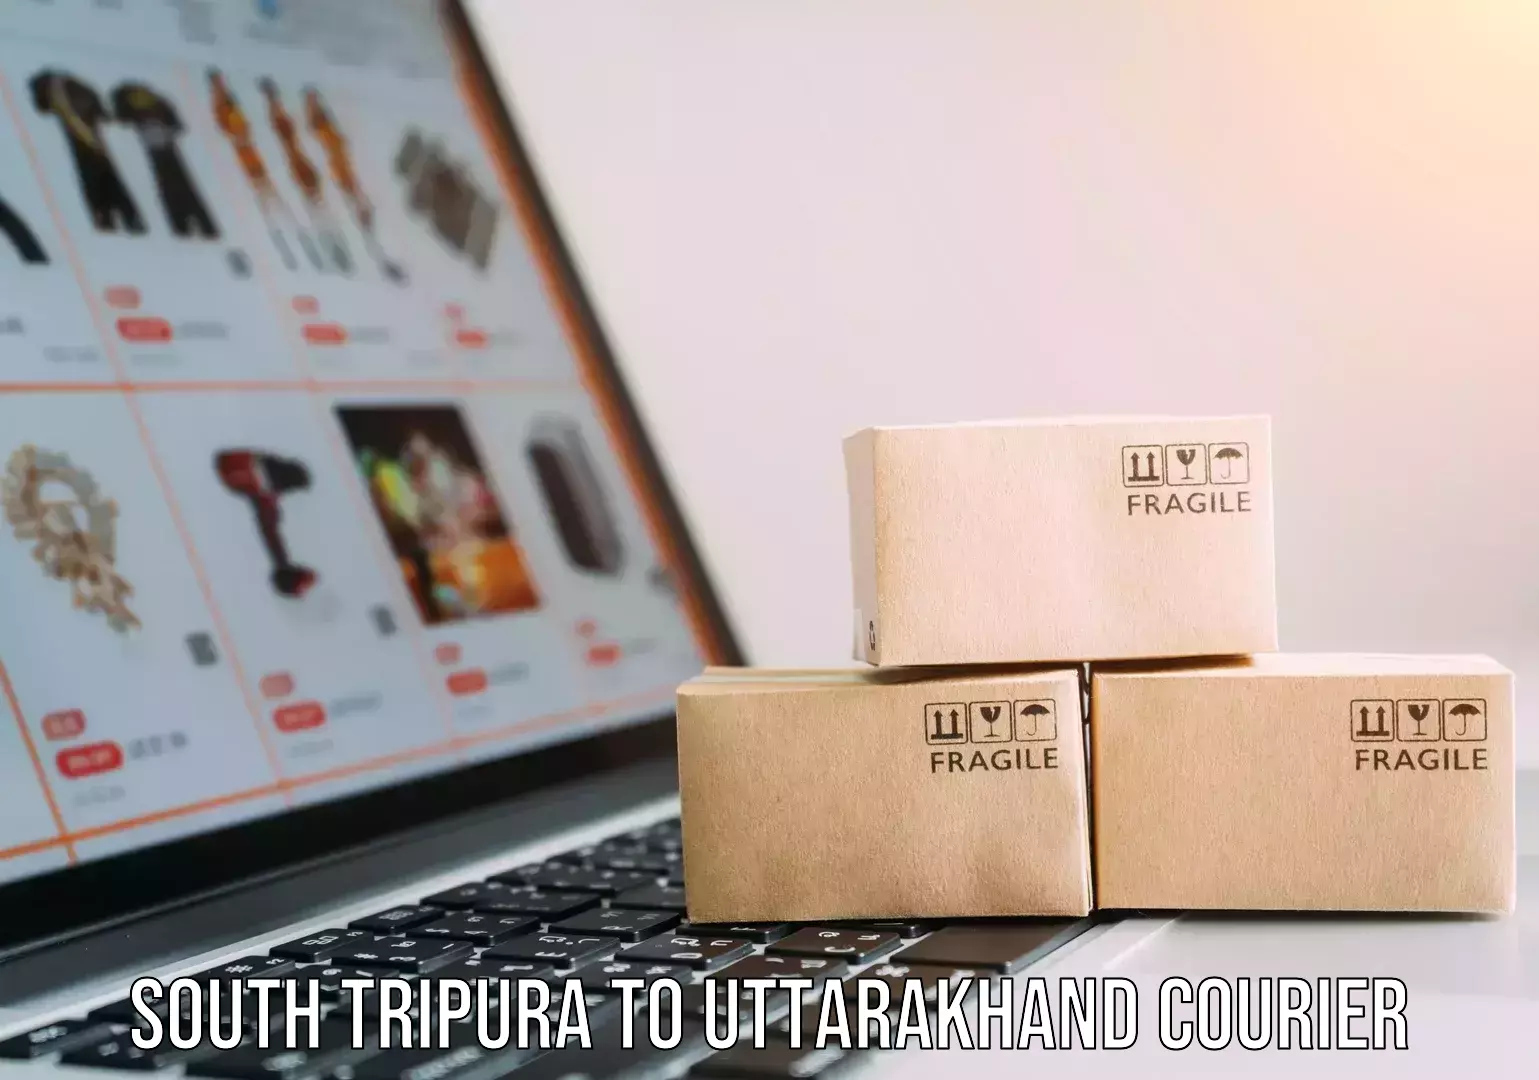 Online courier booking in South Tripura to Uttarakhand